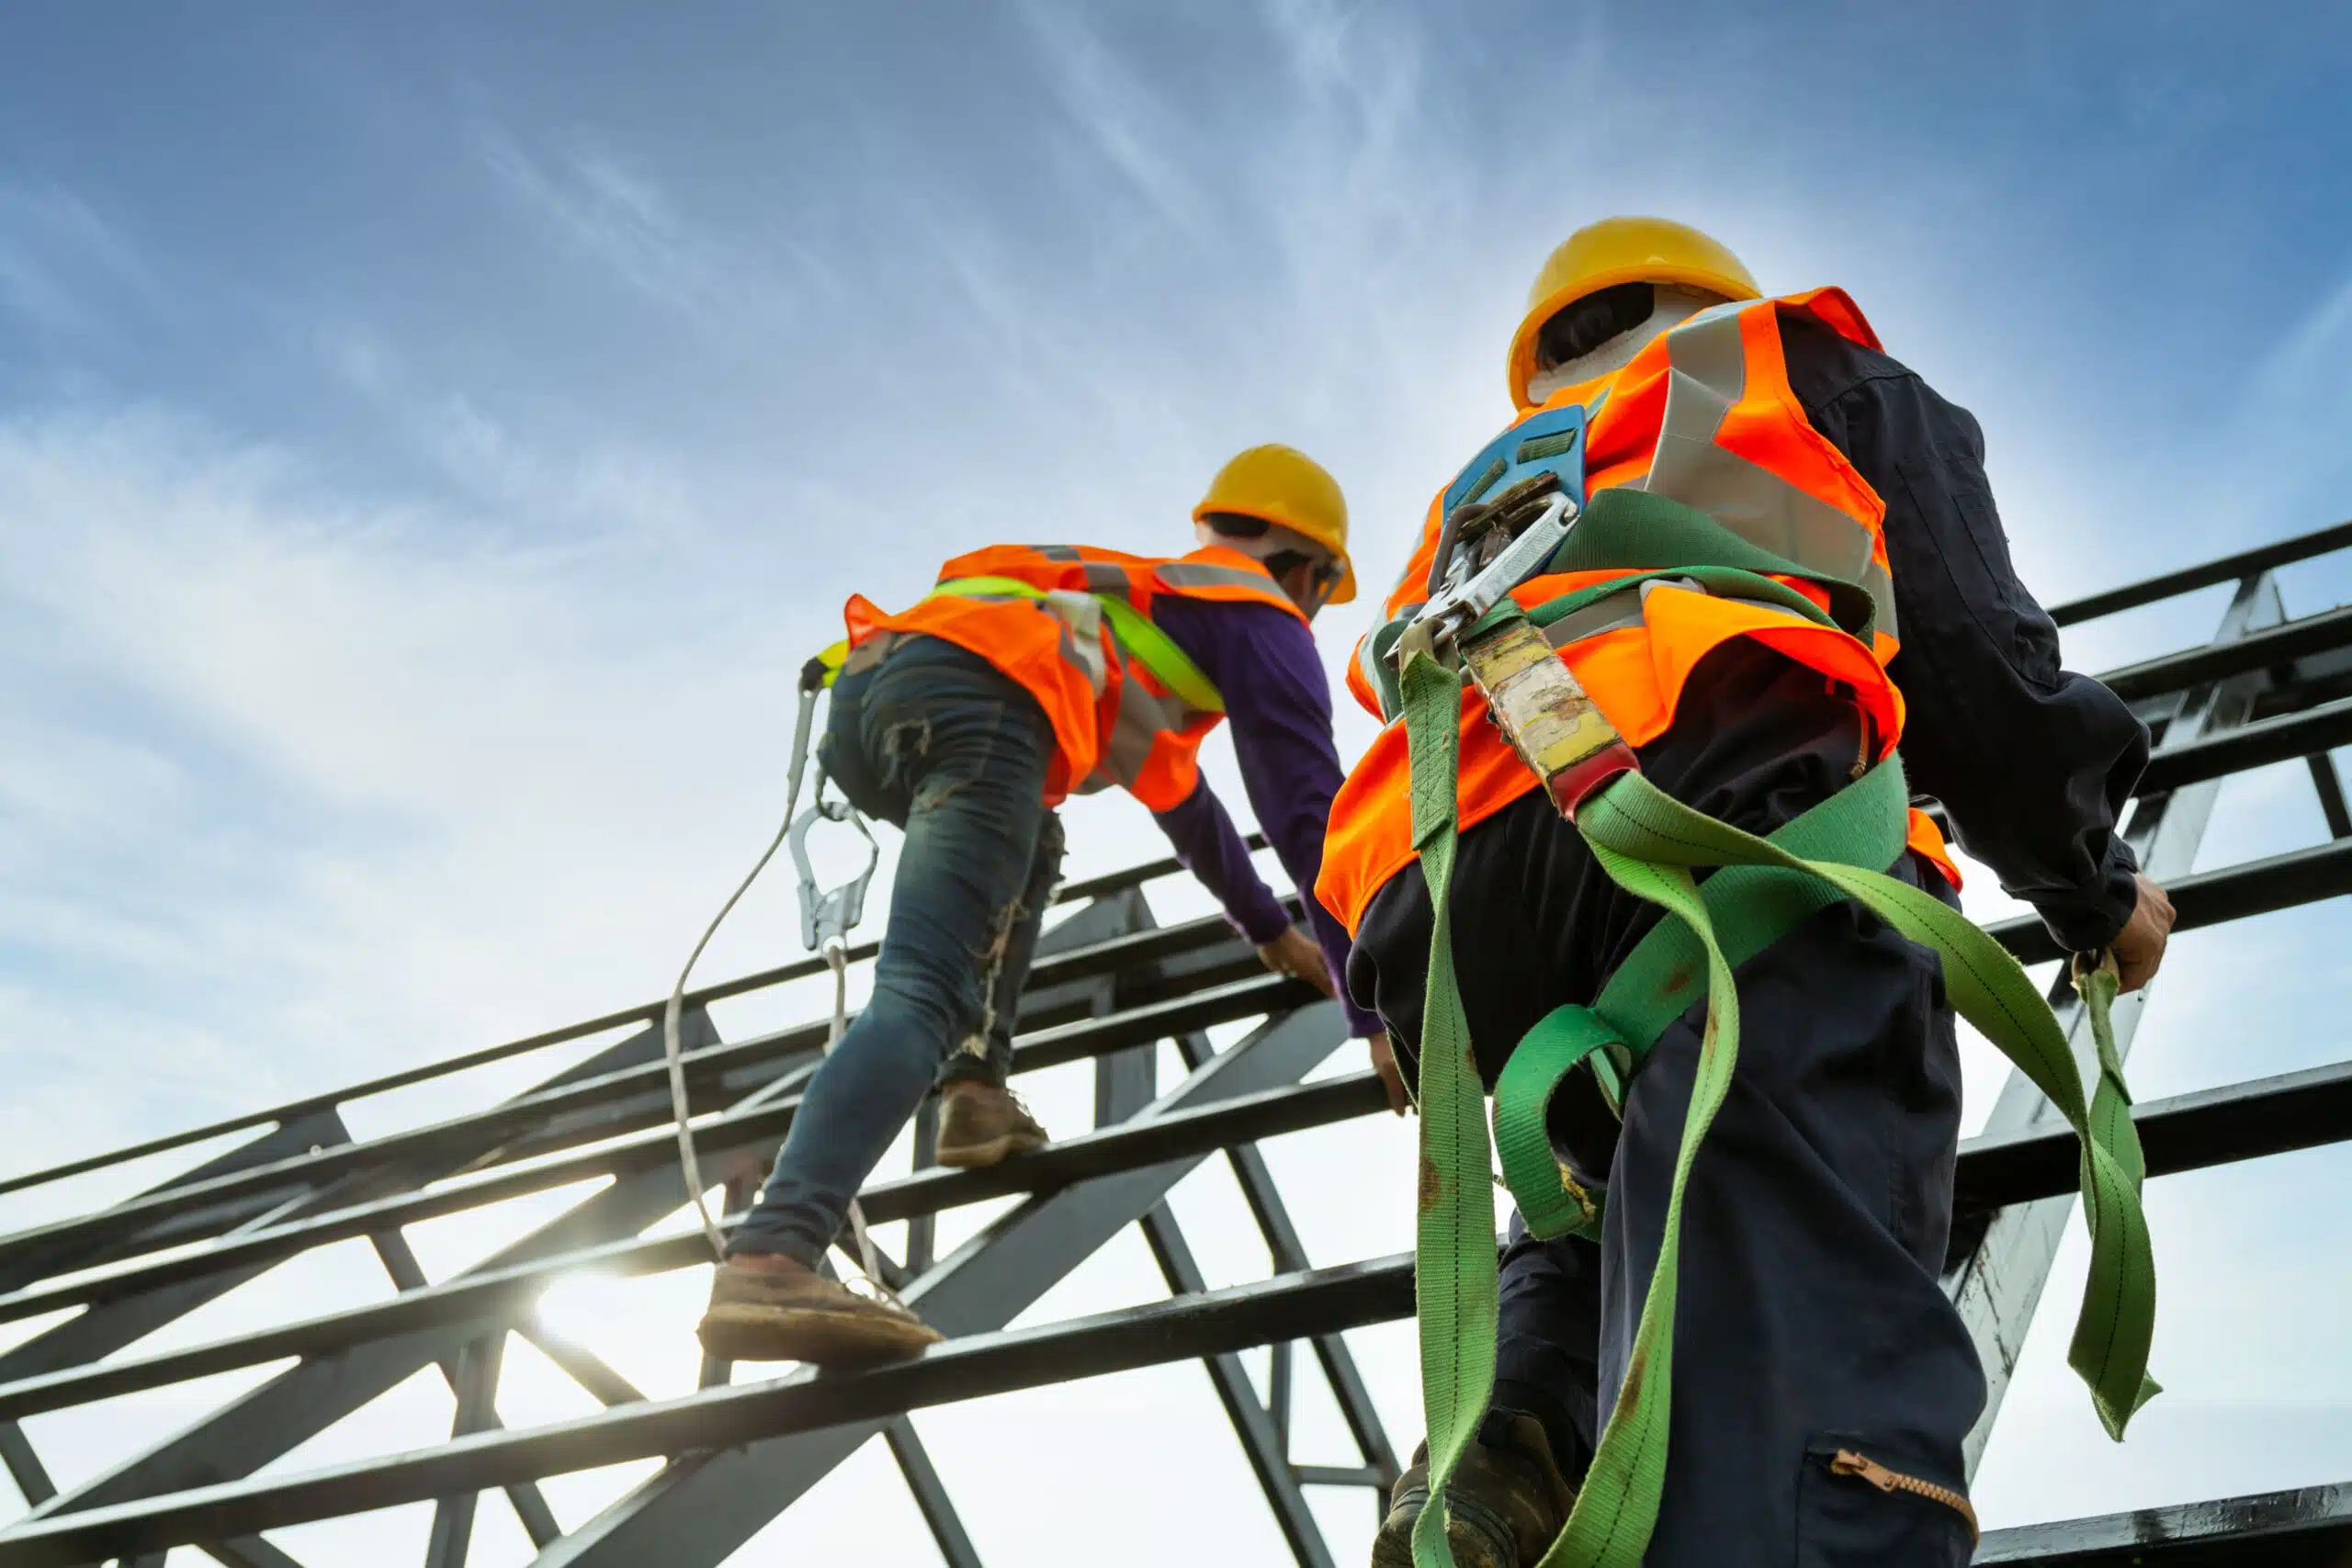 who holds liability for rooftop contractor safety?